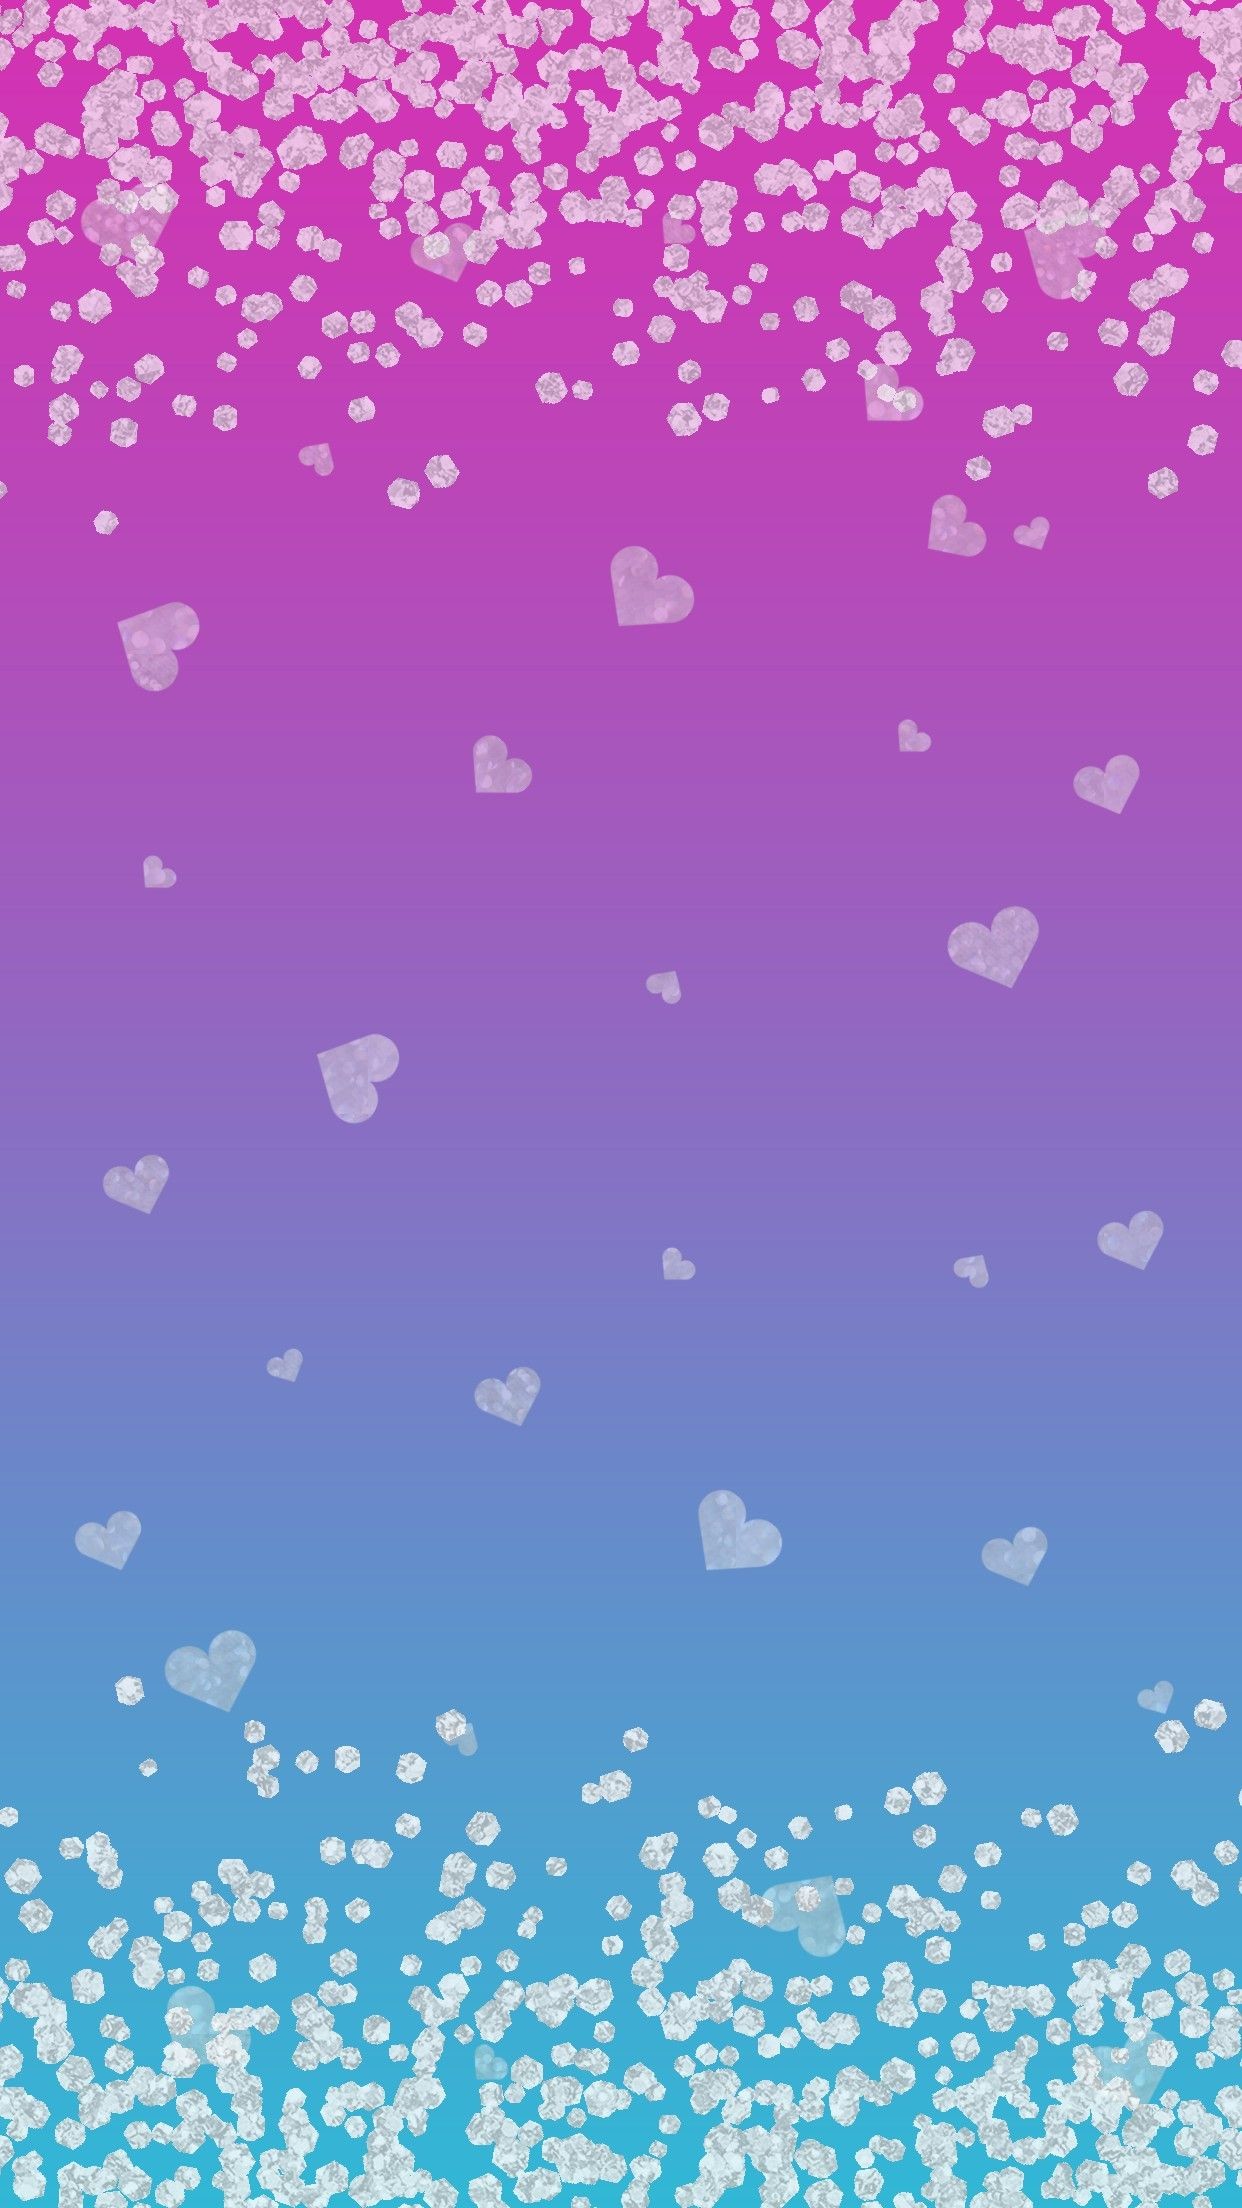 Wallpaper, Background, Iphone, Android, Hd, Pink, Blue, - Iphone Cute Pink  Background - 1242x2208 Wallpaper 